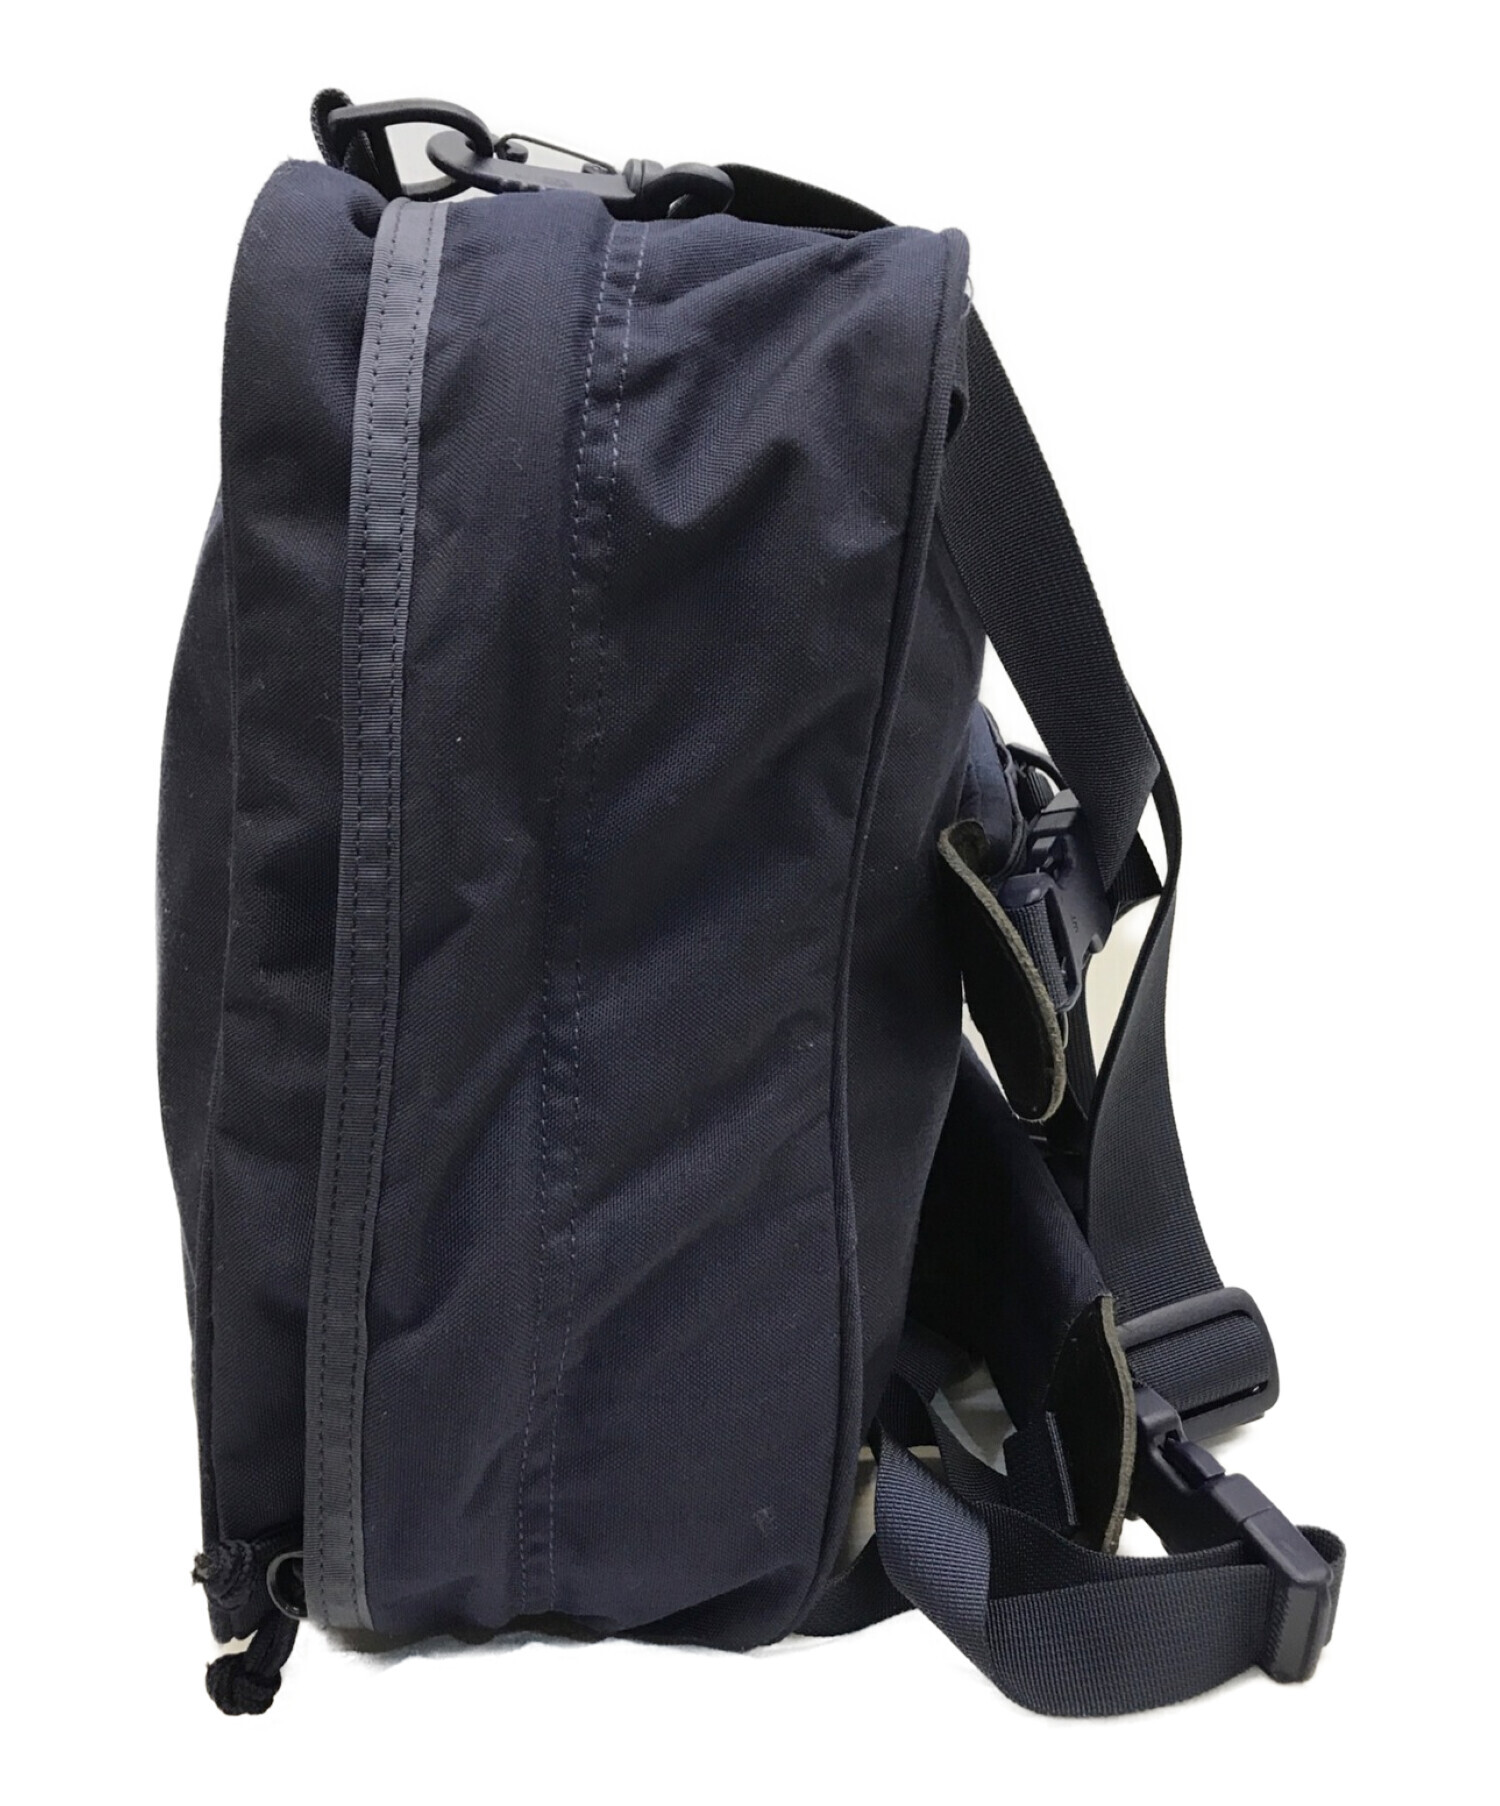 GREGORY〉×〈BEAMS PLUS〉別注 MISSION PACK - ビジネスバッグ